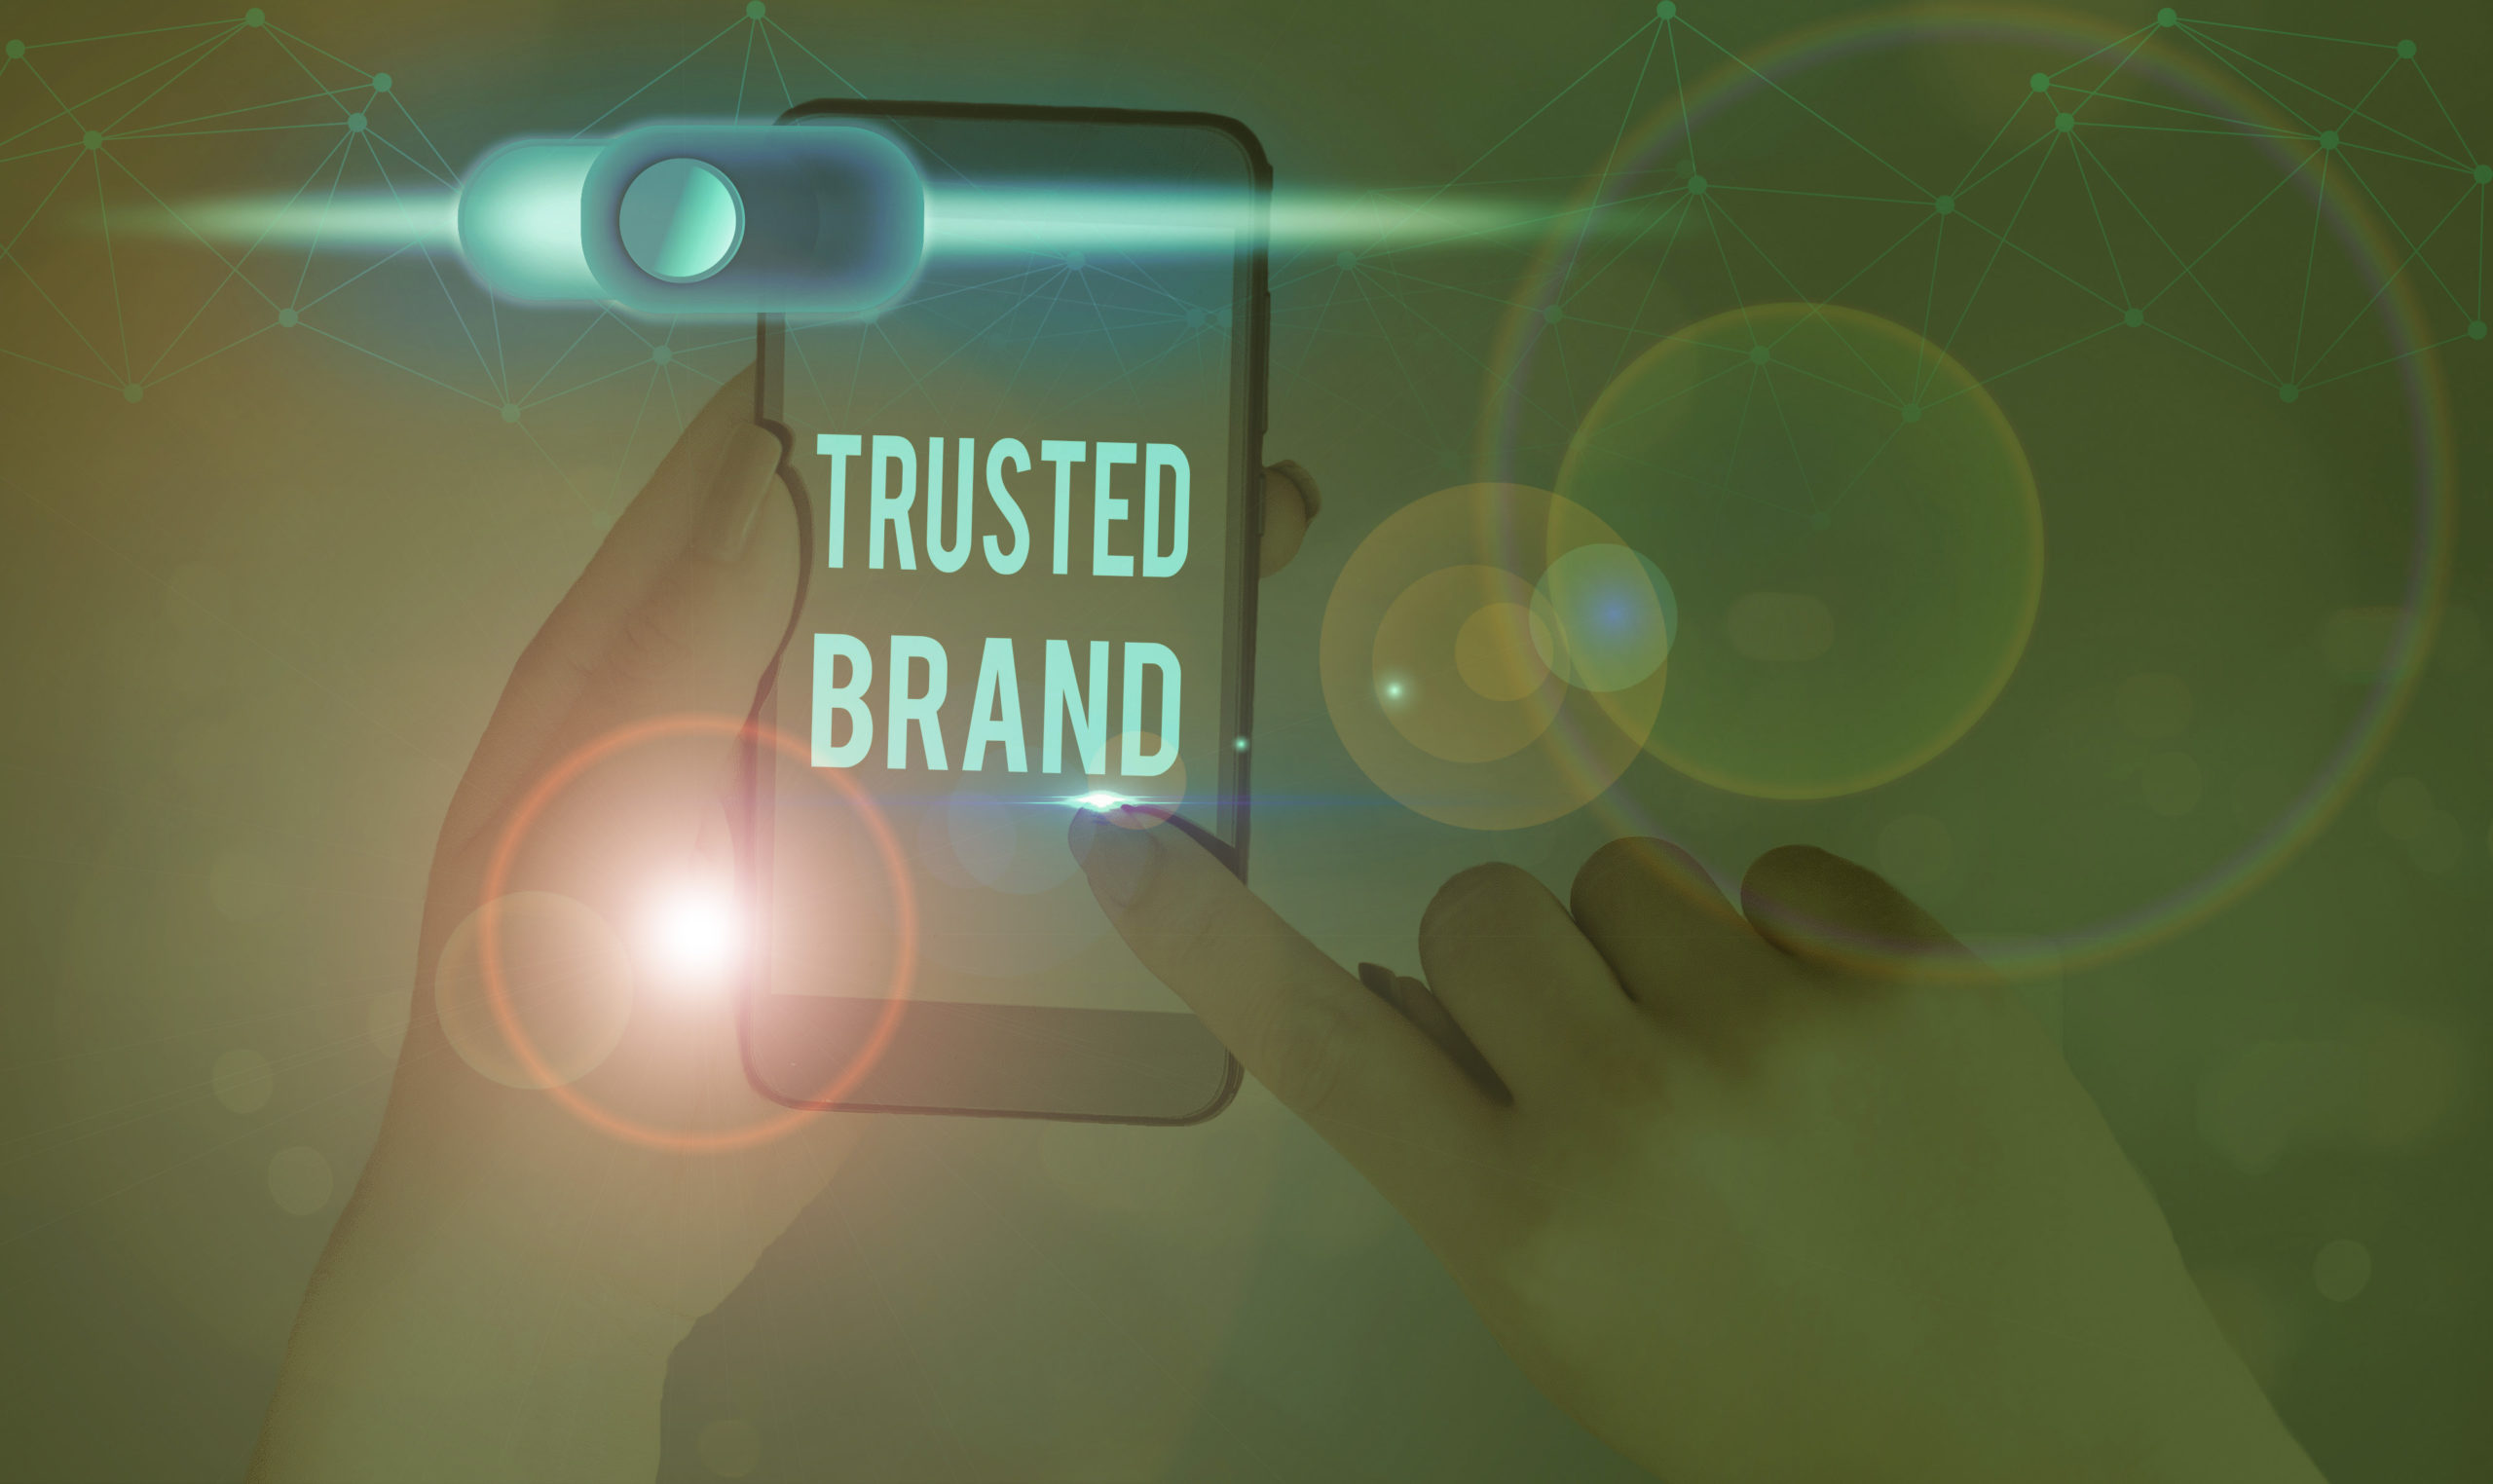 Brand Trust and the Importance of Being Earnest